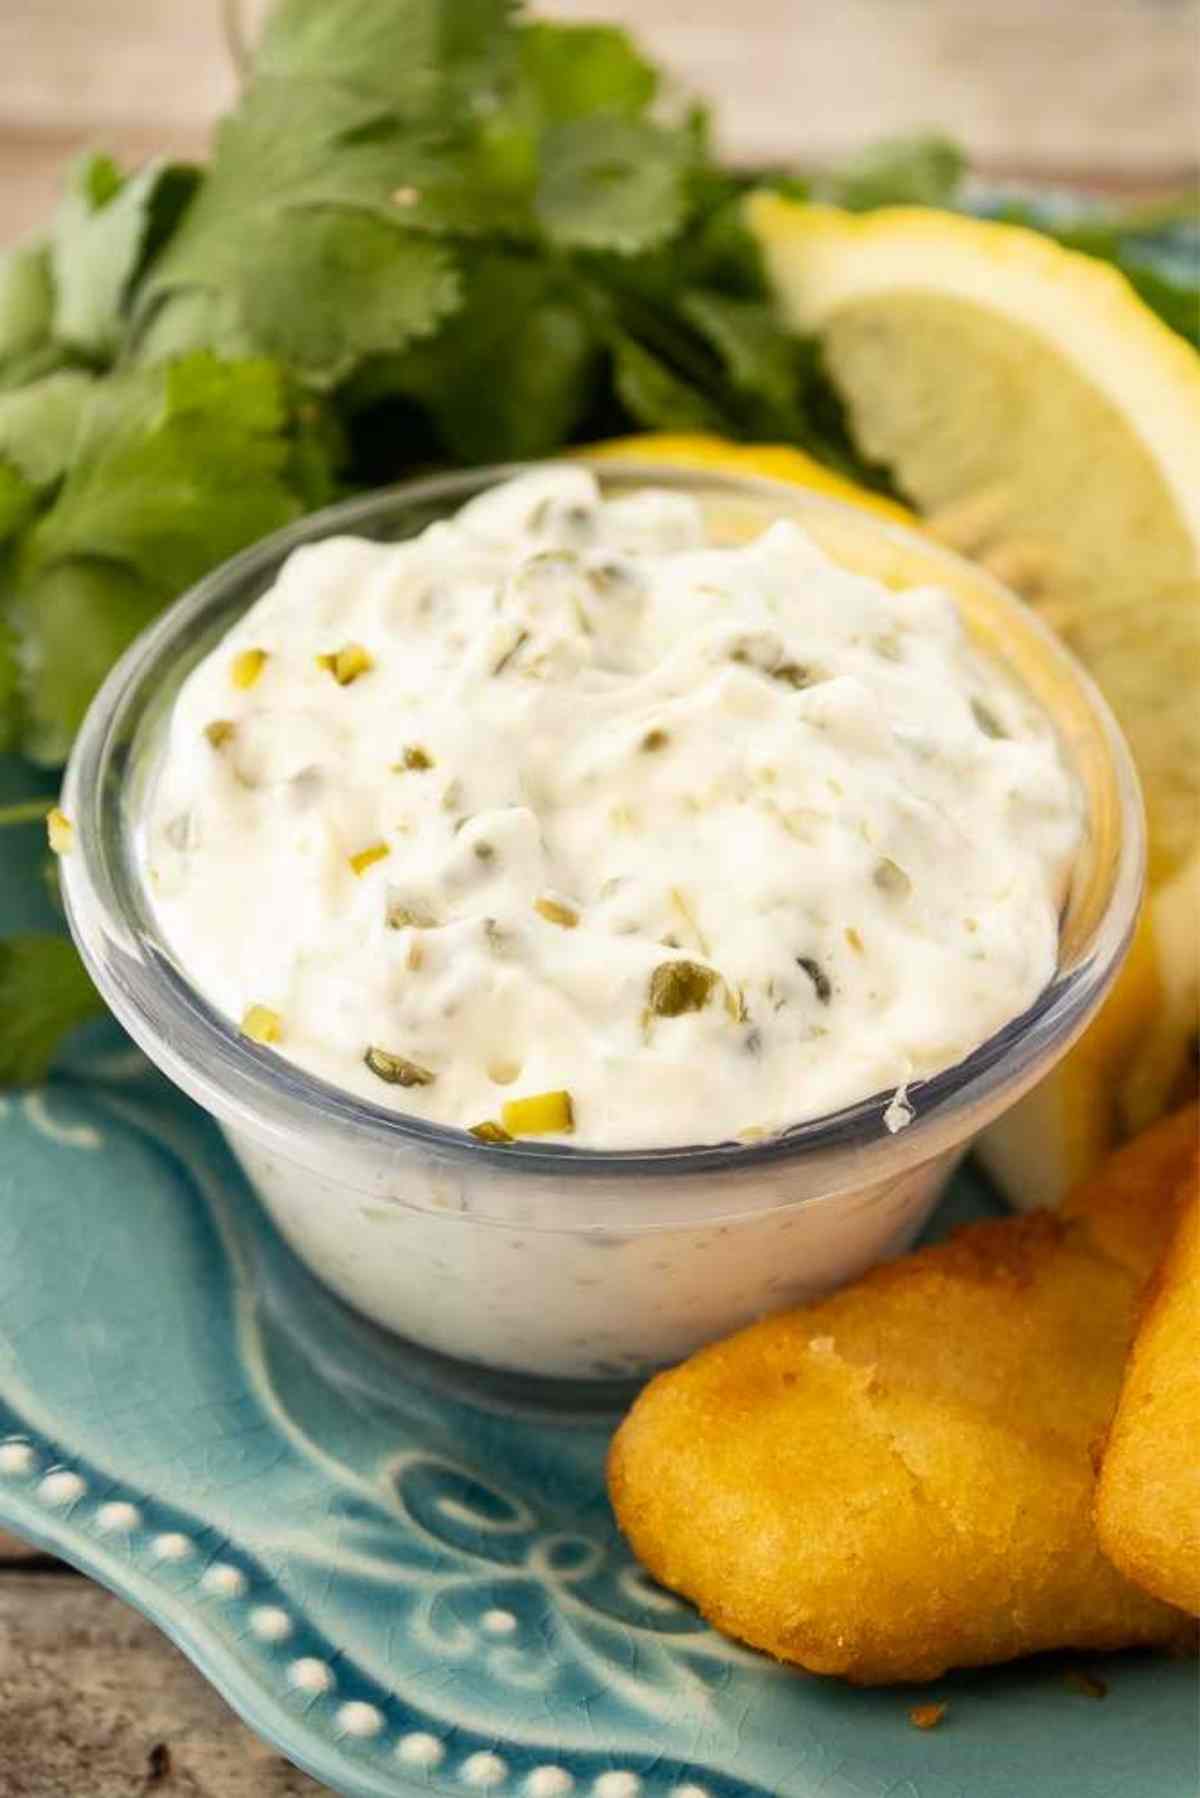 A dipping bowl filled with tartar sauce placed on a plate next to some fish fillets.